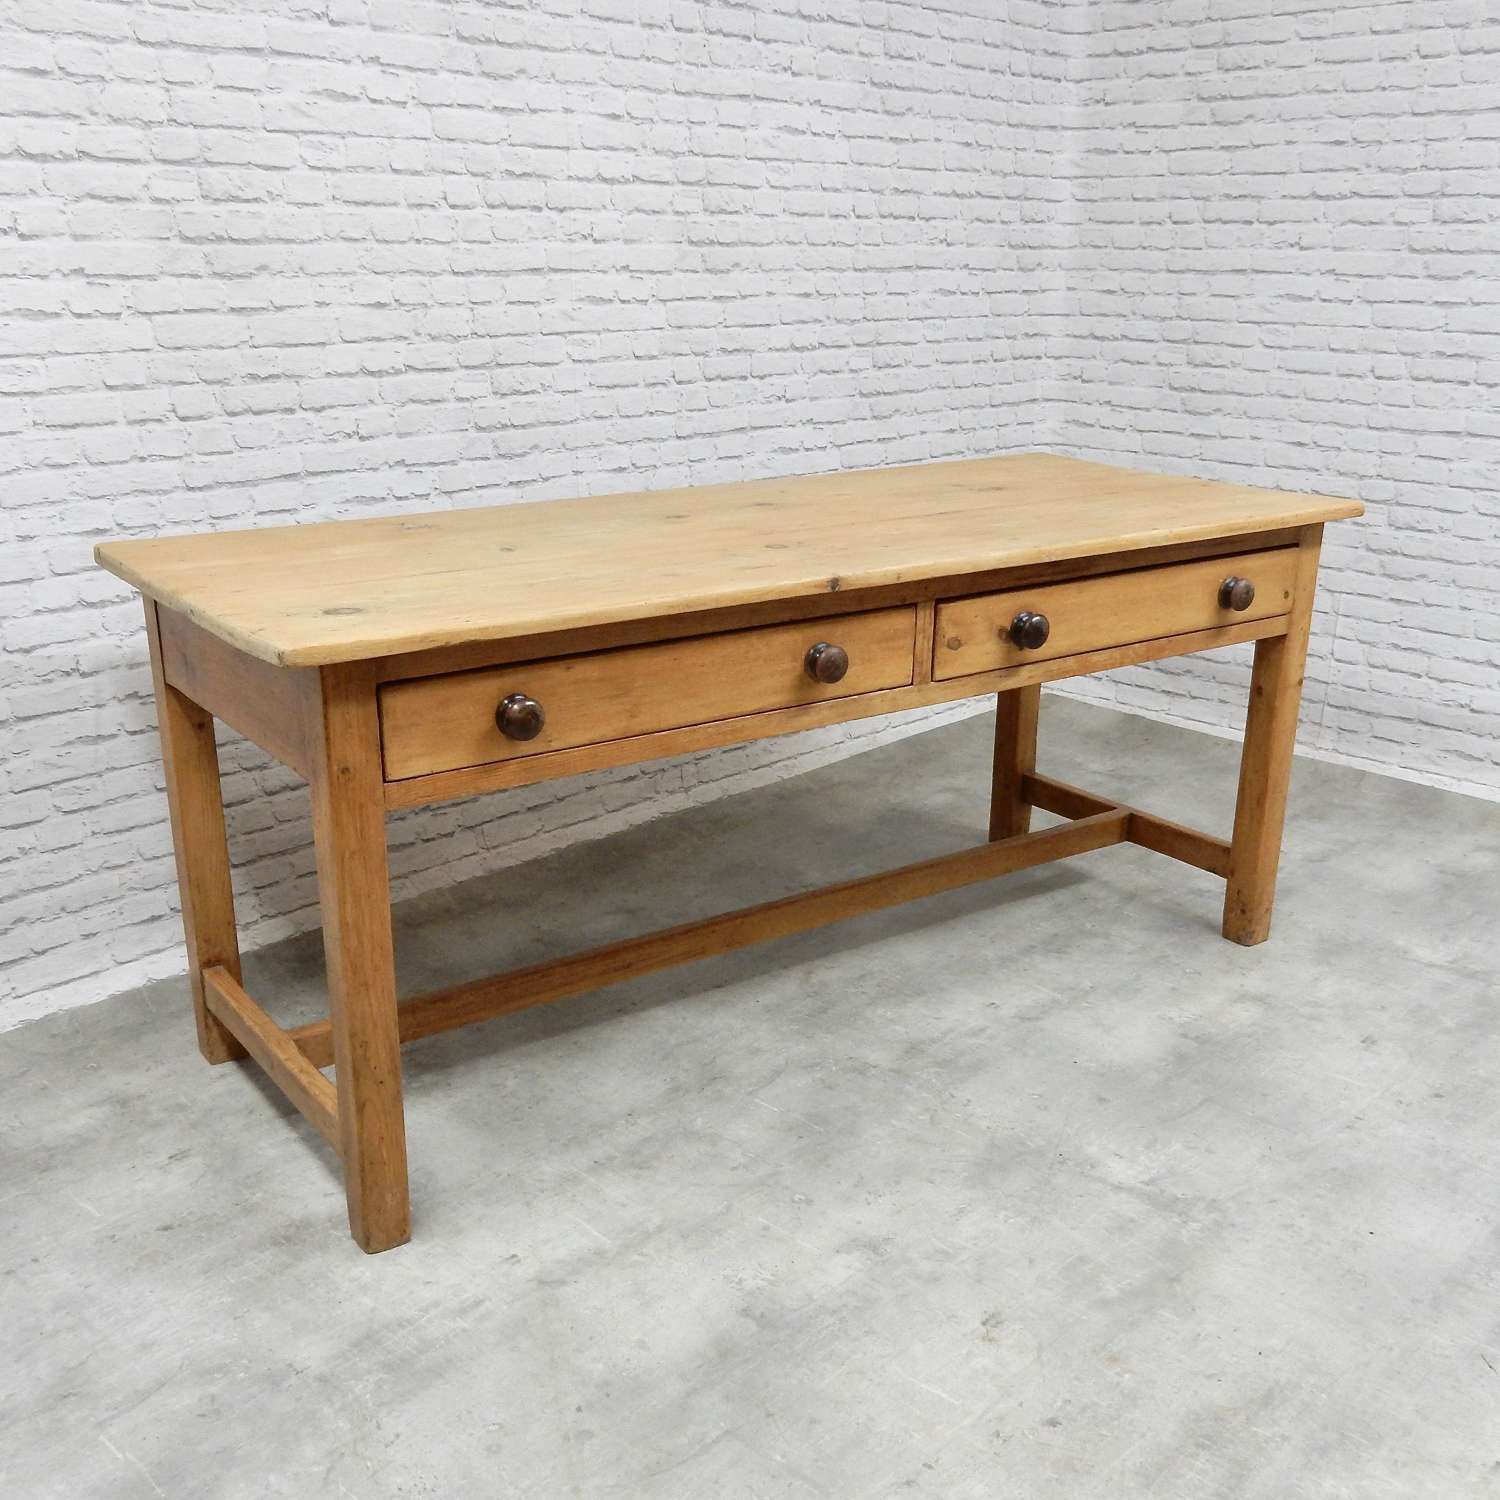 C19th Pine Refectory Table